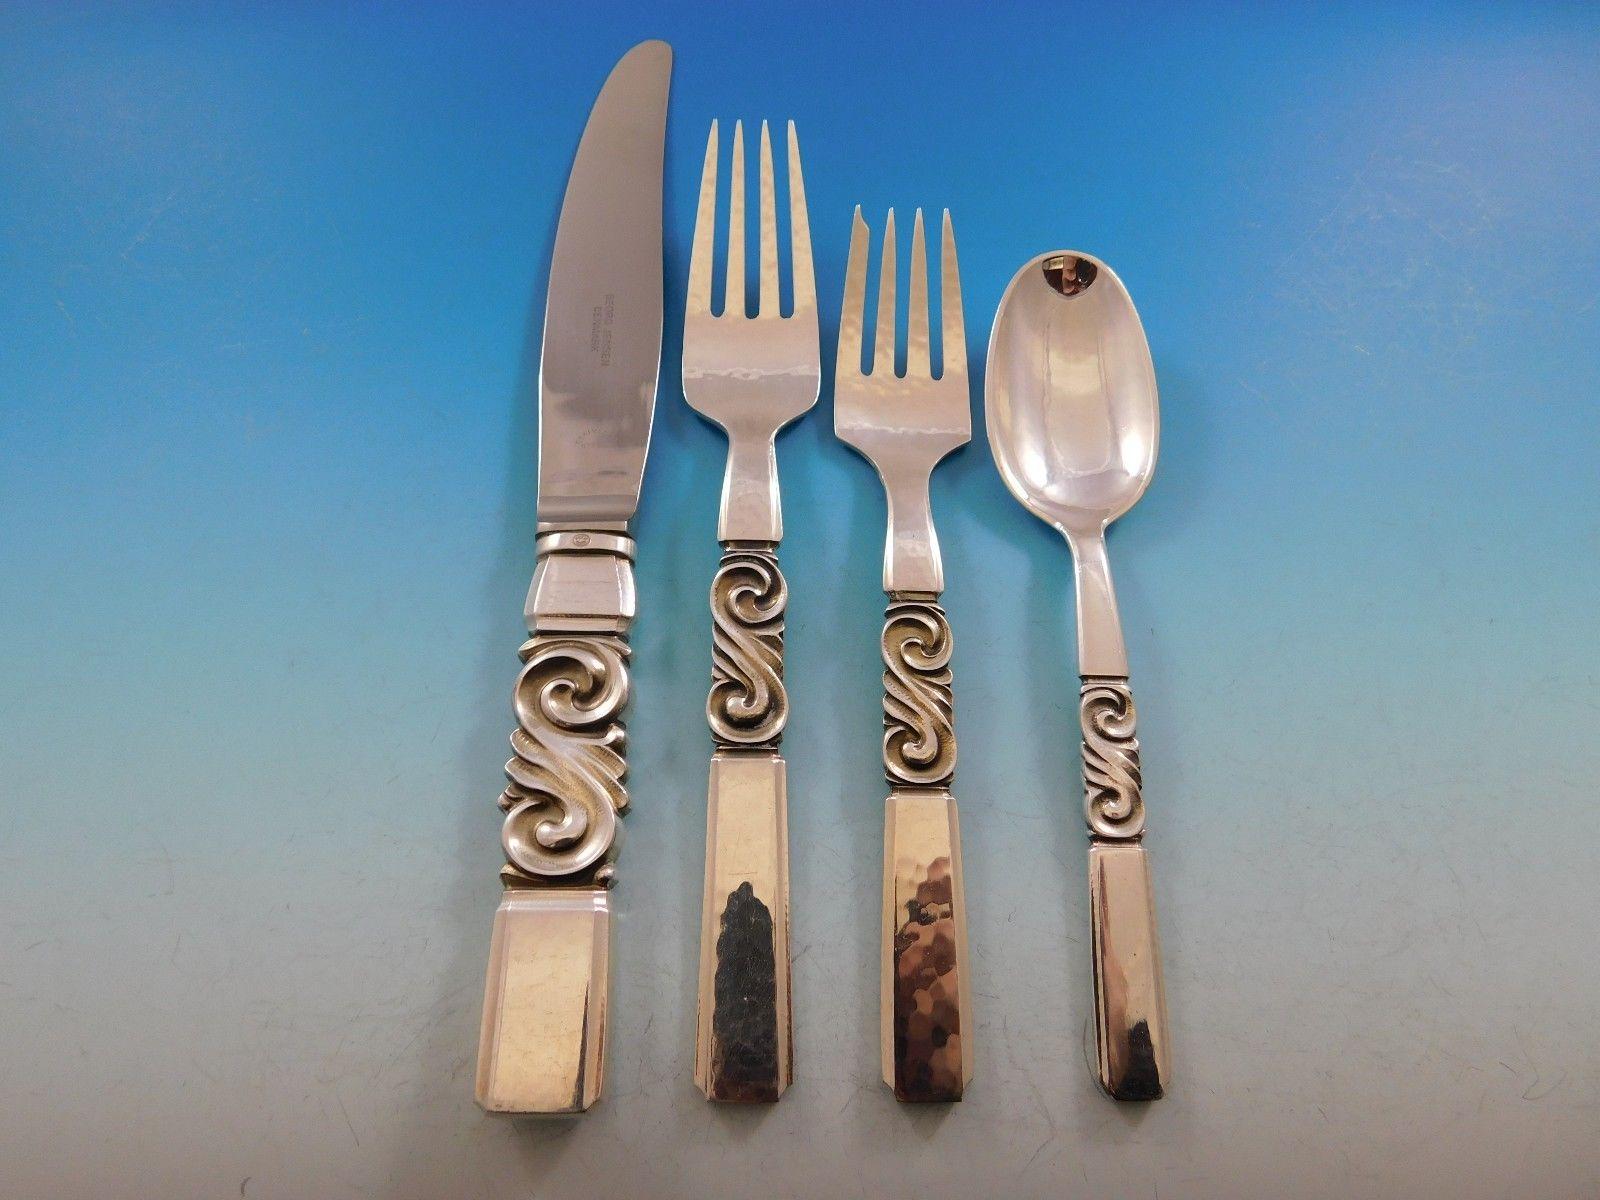 Dinner size scroll by Georg Jensen Danish sterling silver flatware set - 54 pieces. This set includes:

8 dinner knives, short handle, 9